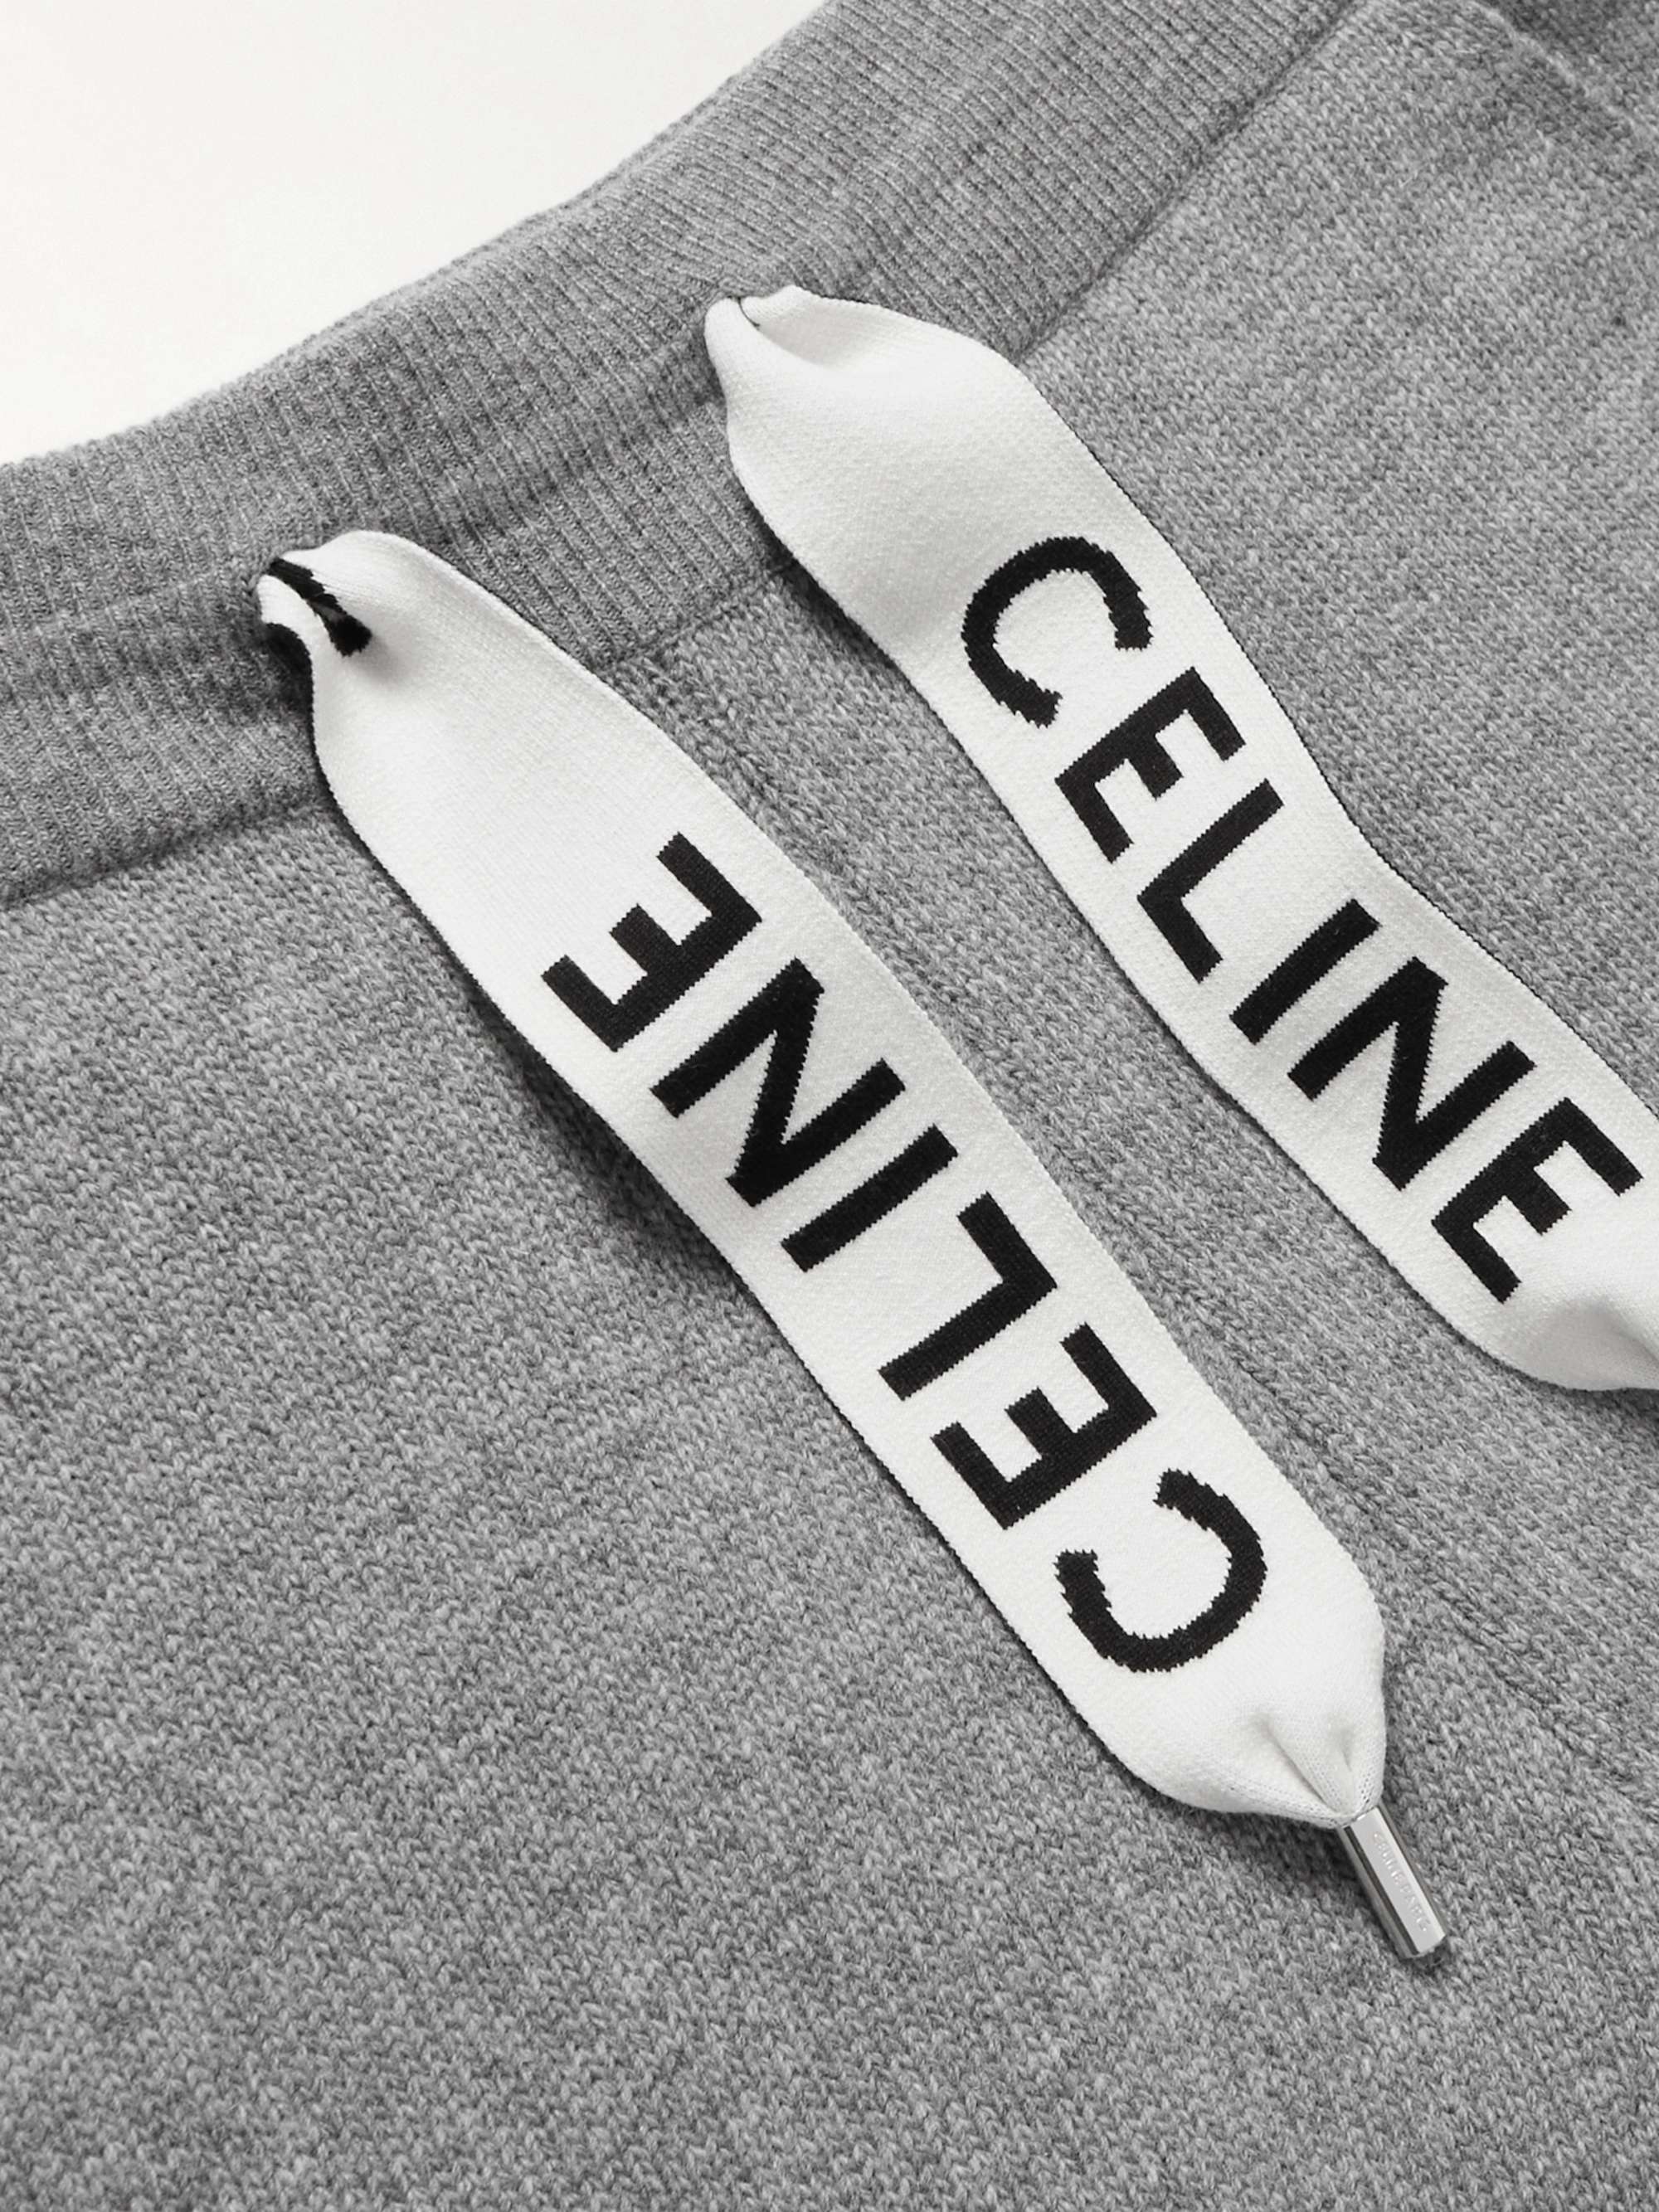 CELINE HOMME Wool and Cashmere-Blend Sweatpants